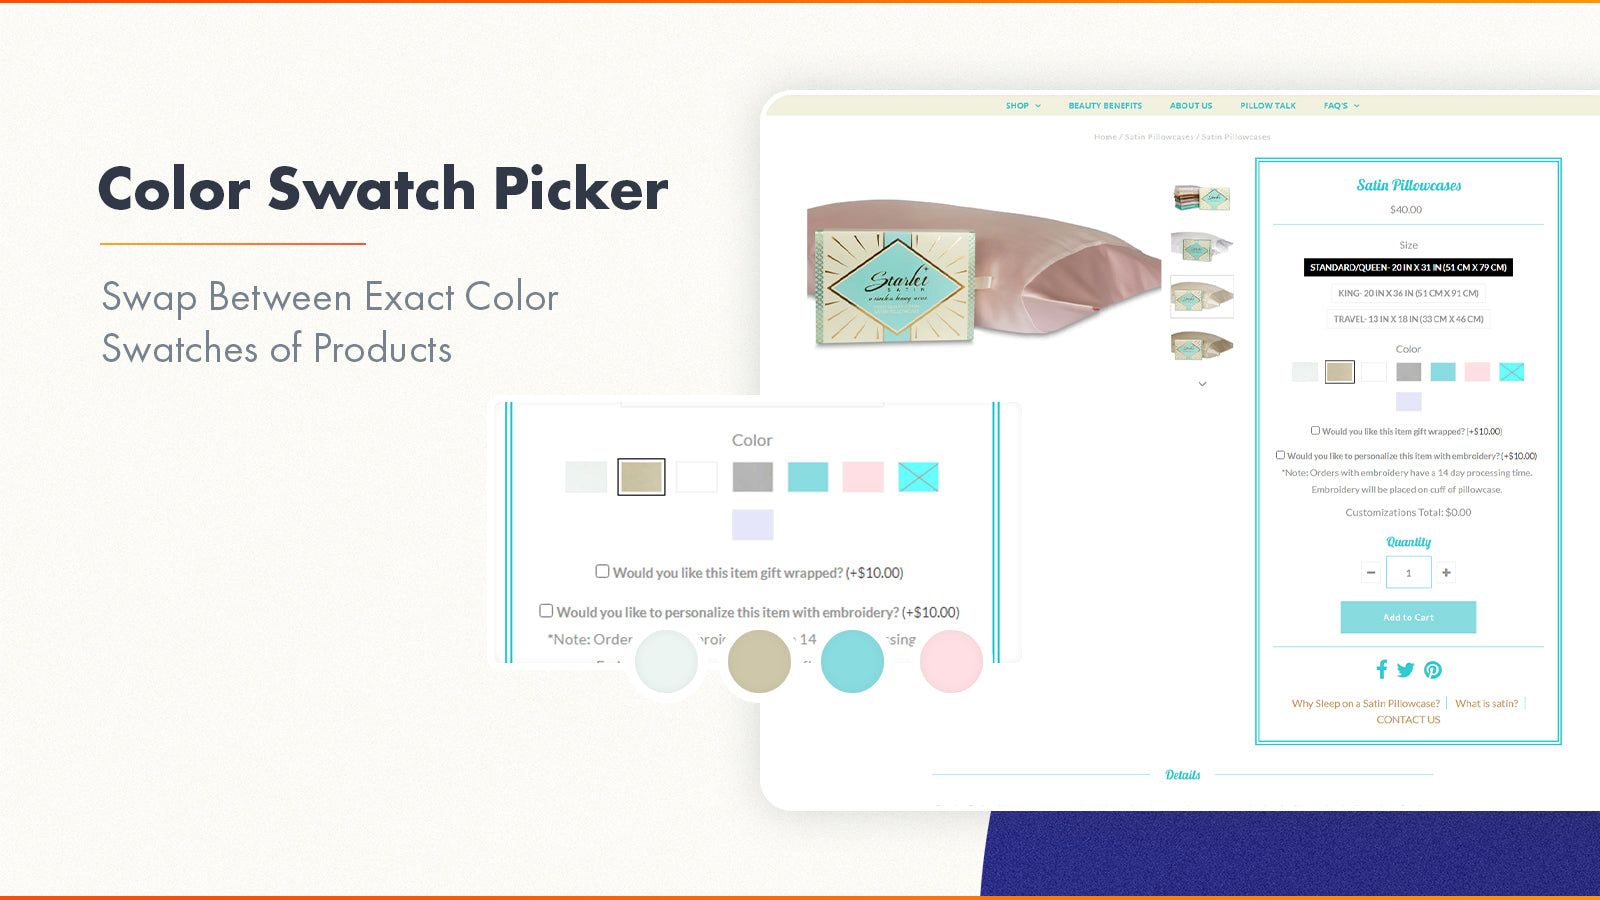 Swap between color variations with the image swatch feature